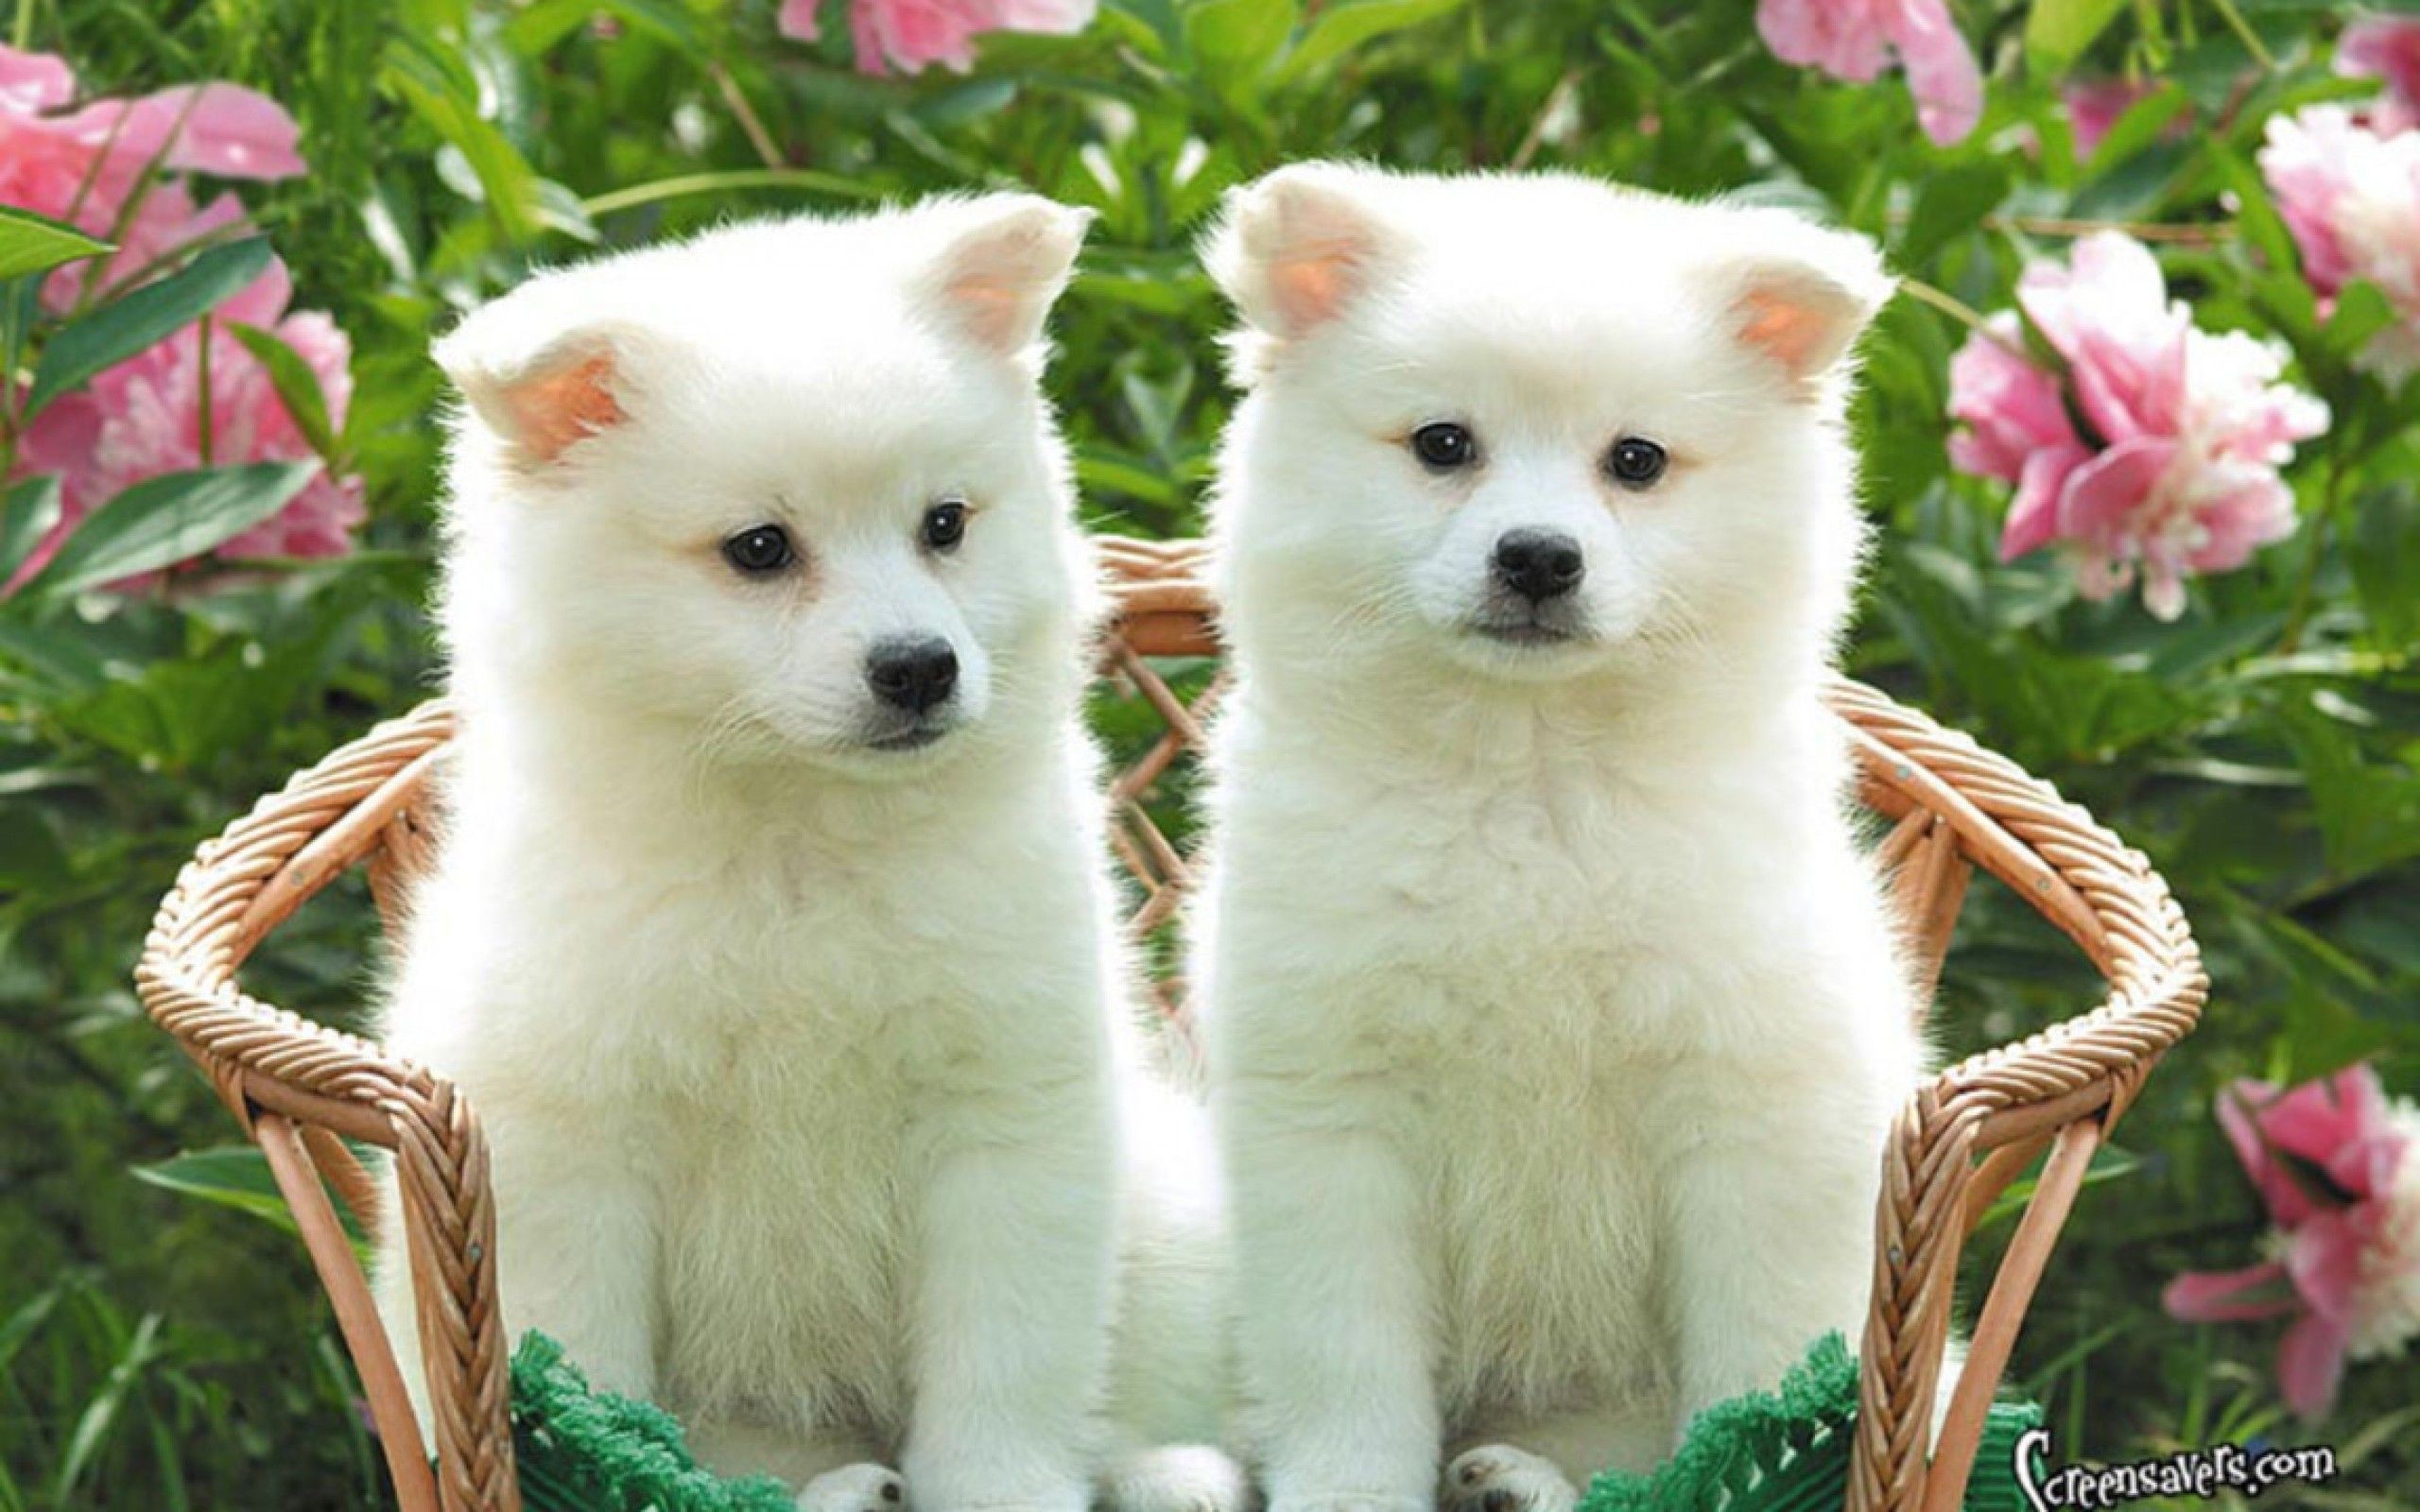 2560x1600 Puppies Together Hd Wallpaper For Desktop And Cute Kittens .